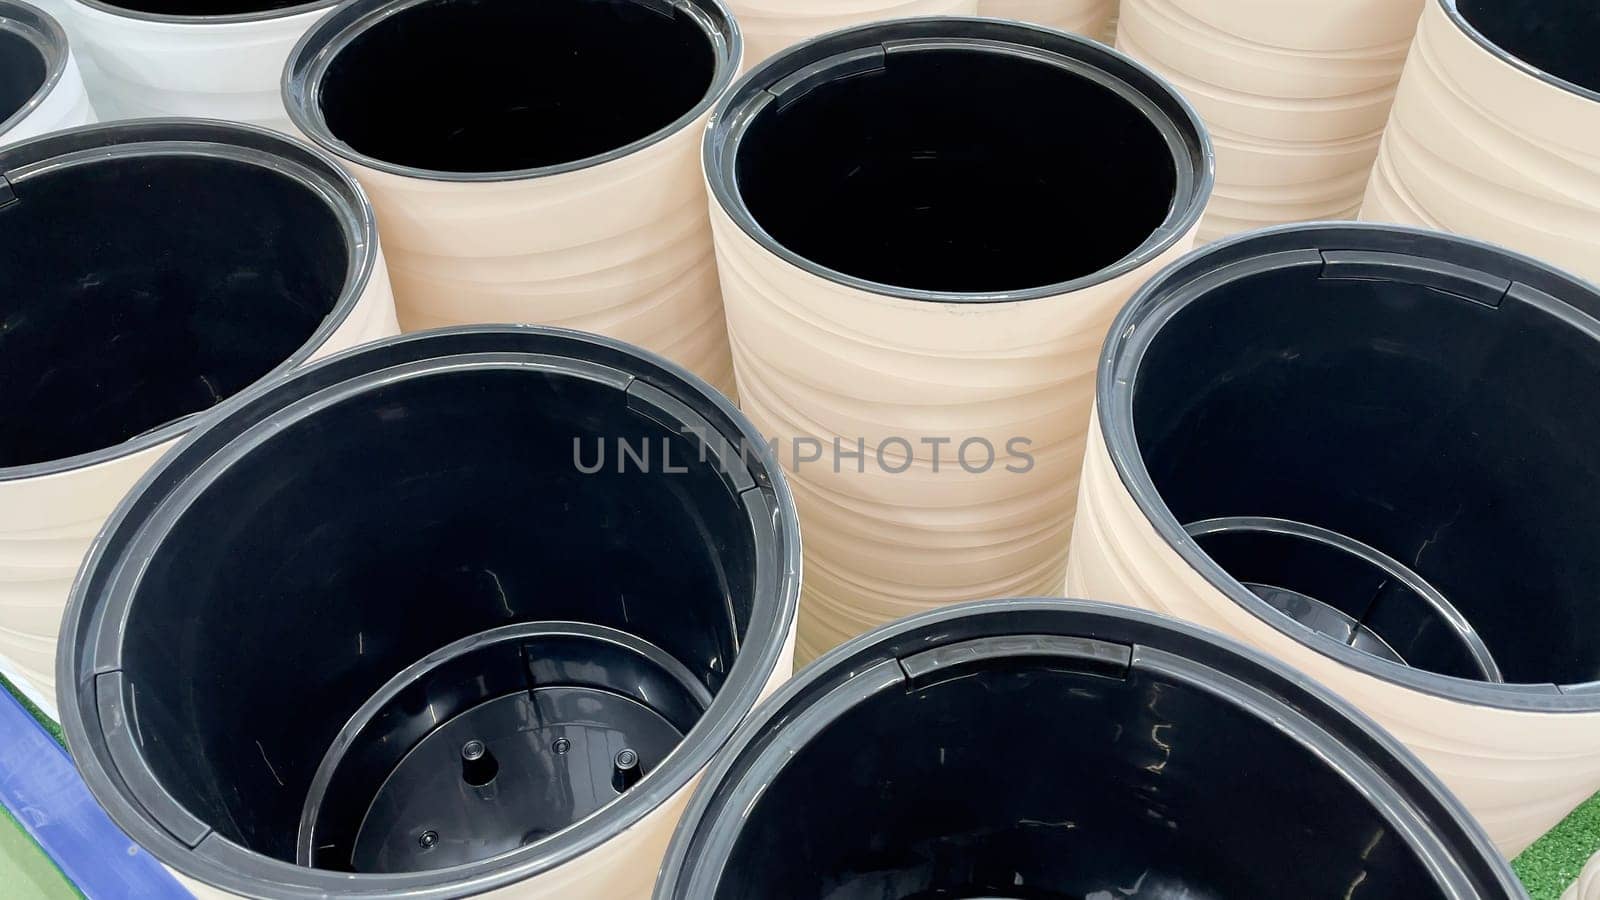 Close-up of empty flower pots in a store or greenhouse. Colorful pots for plants. Gardening and landscape design concept.